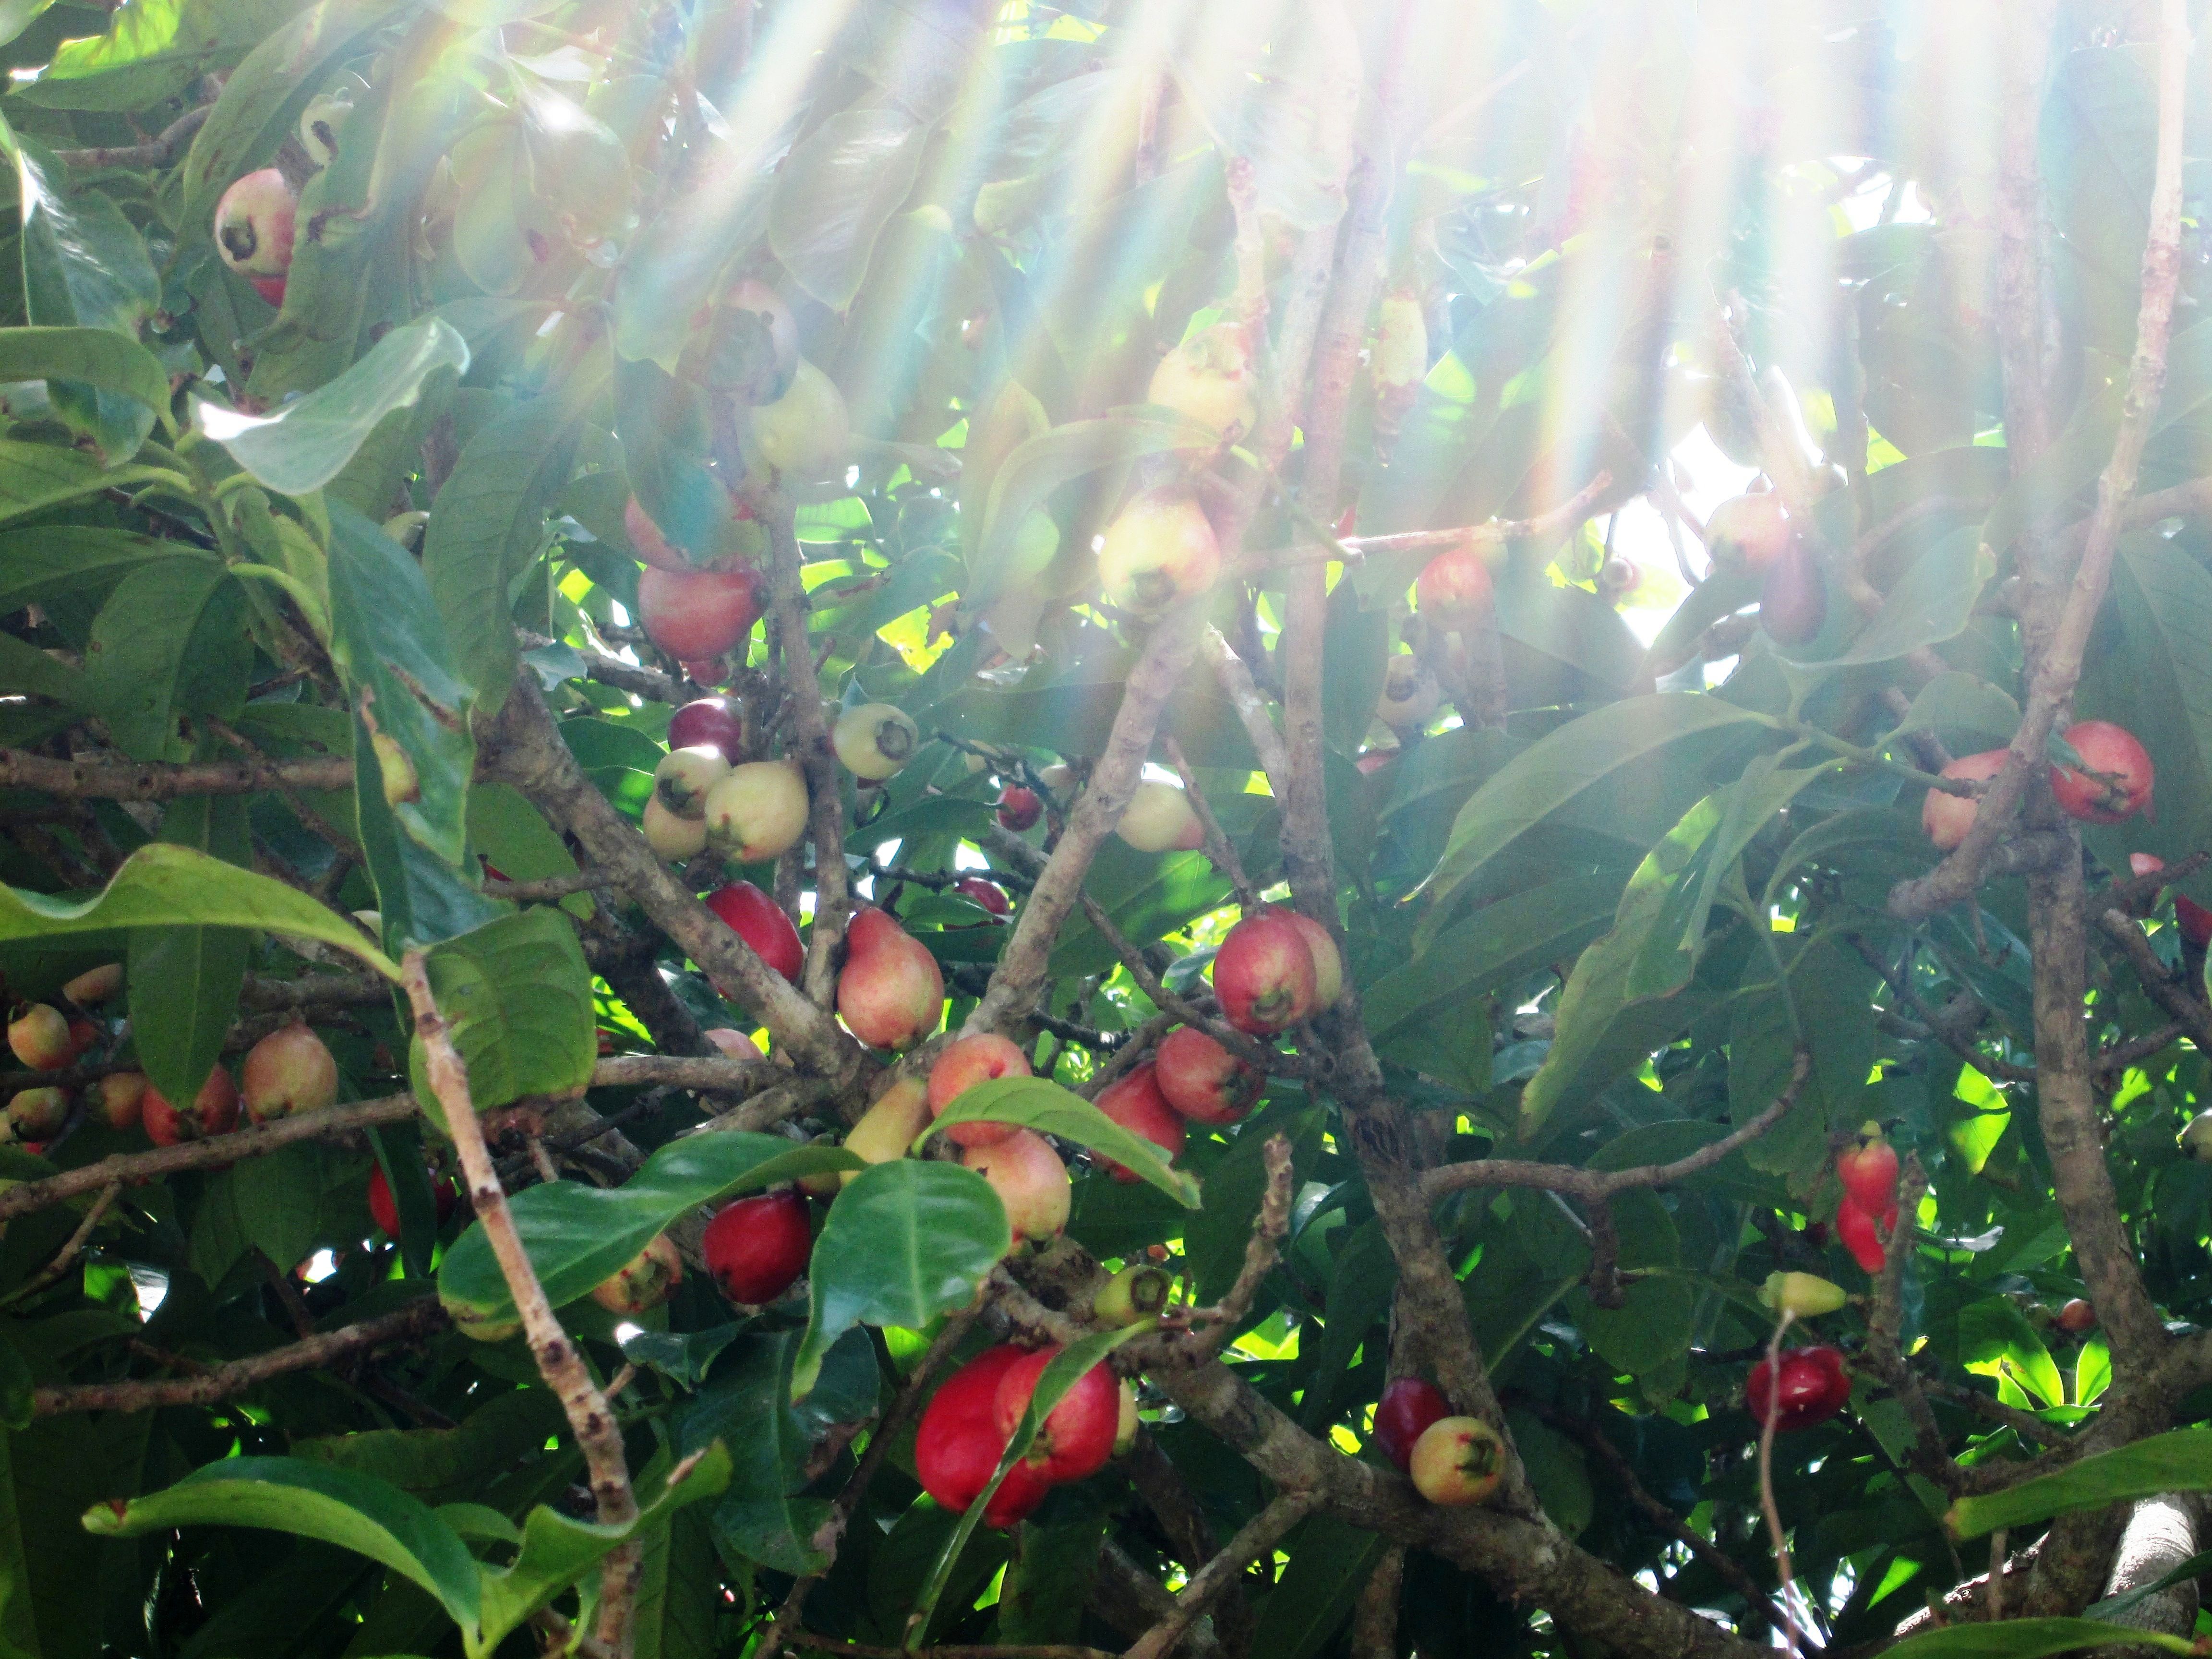 Light of life: the rays of the sun penetrate through the foliage of a tropical fruit tree called 'water apples'